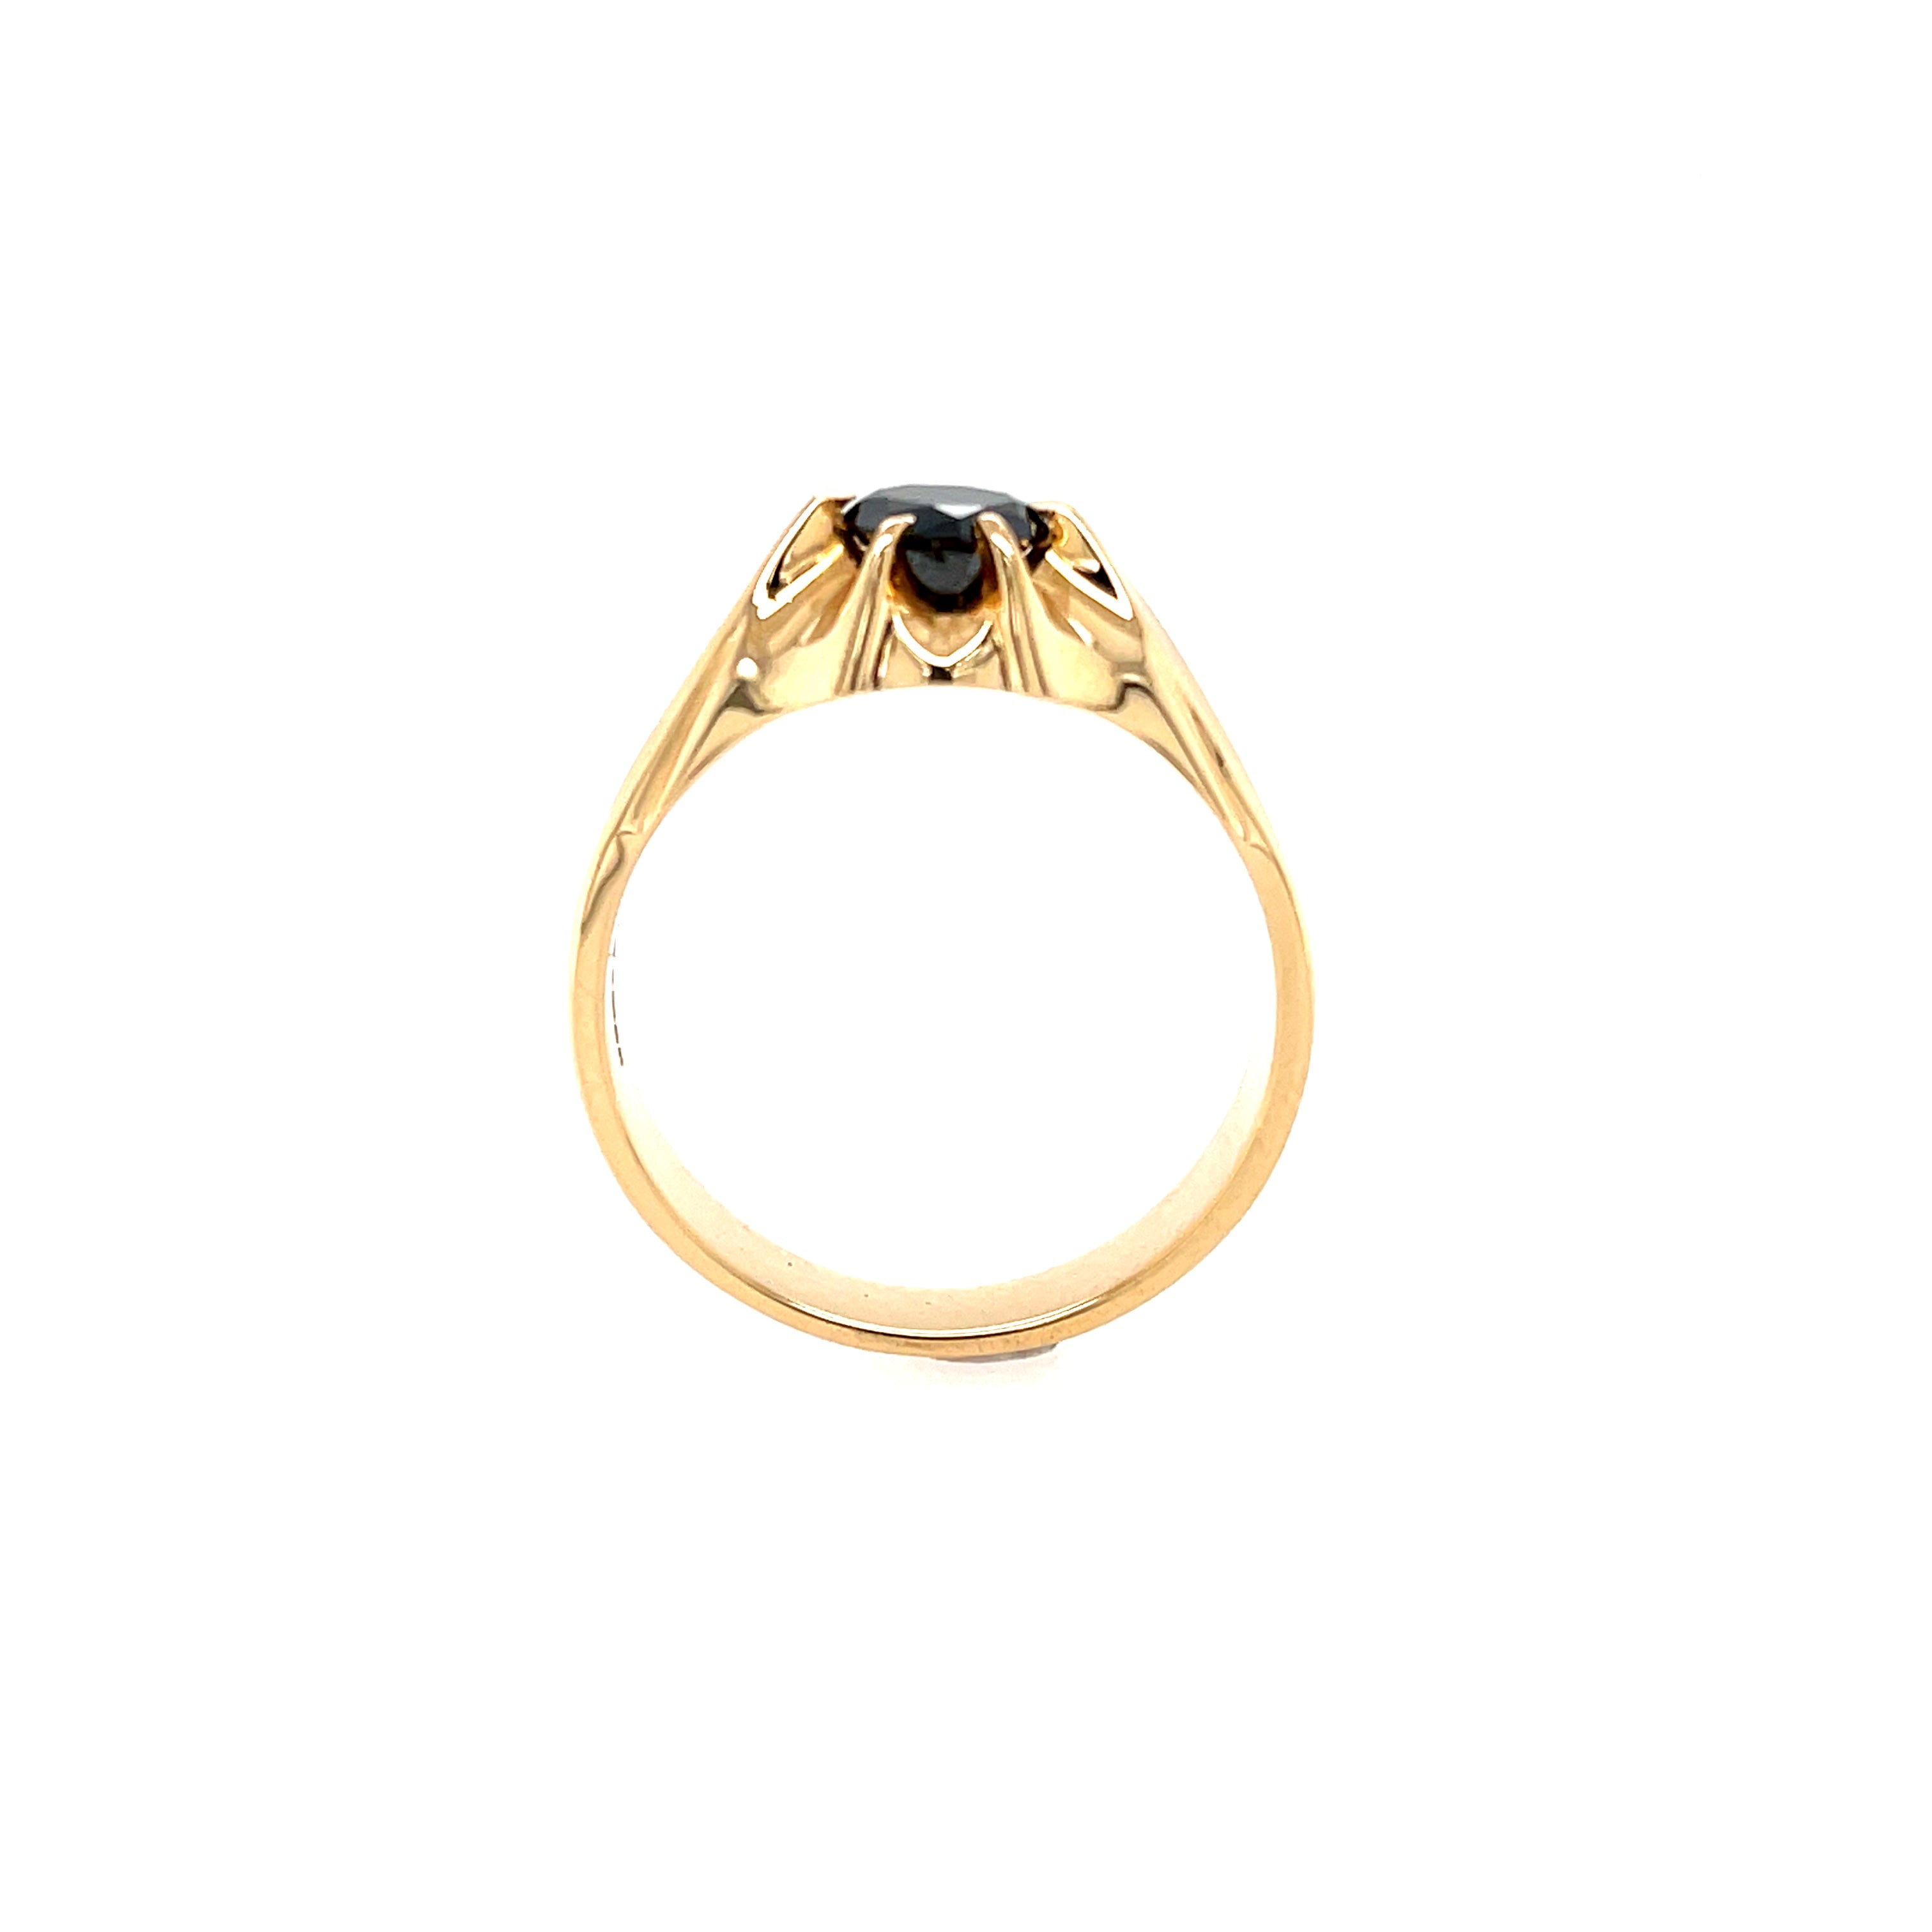 18ct Yellow Gold 0.75ct Black Diamond Solitaire Gypsy Ring